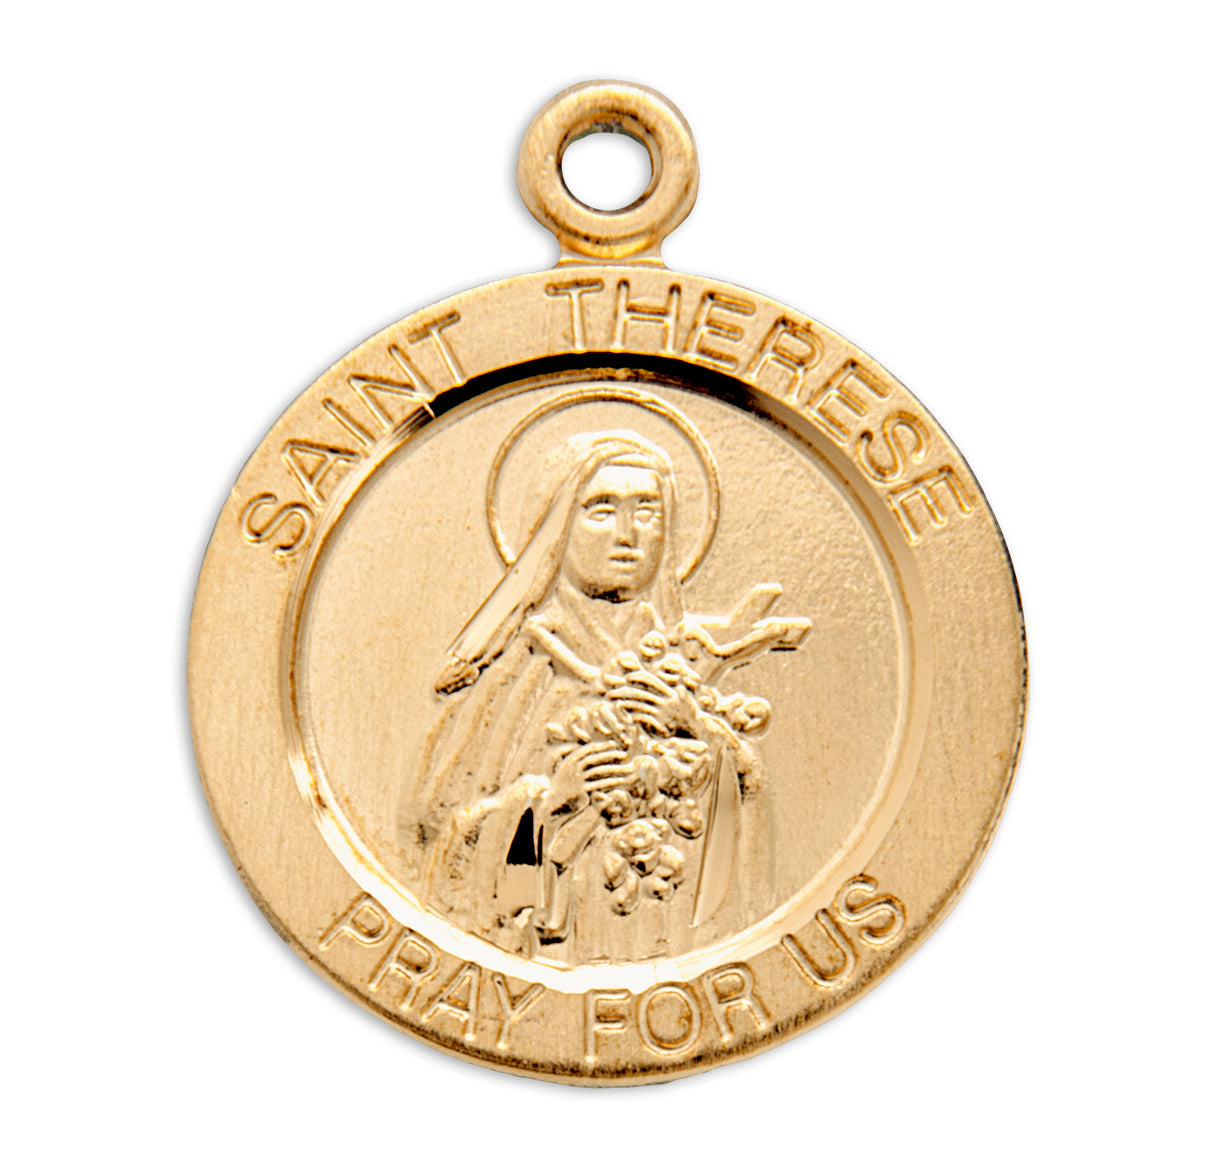 St. Therese of Lisieux Gold Medal Necklace